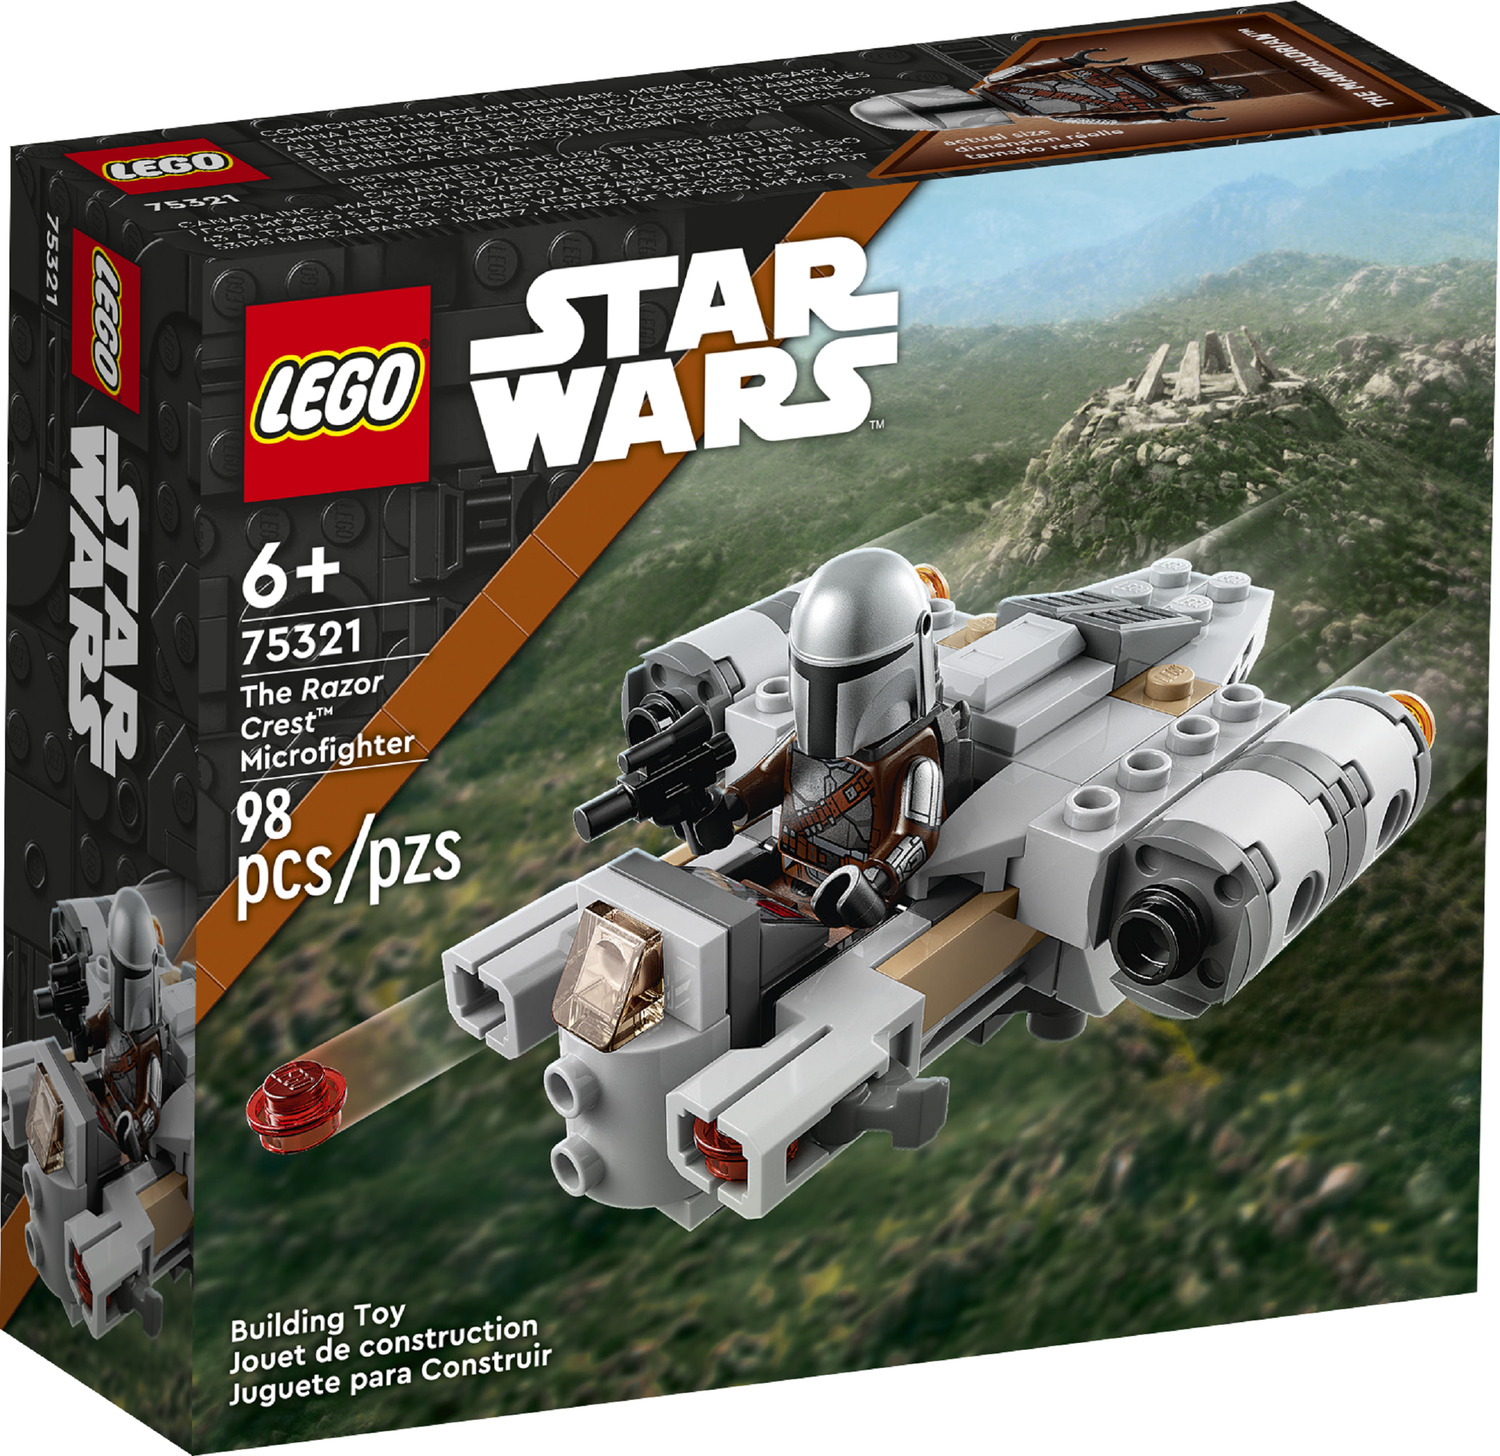 LEGO Star Wars: The Razor Crest Microfighter - The Toy Hanover